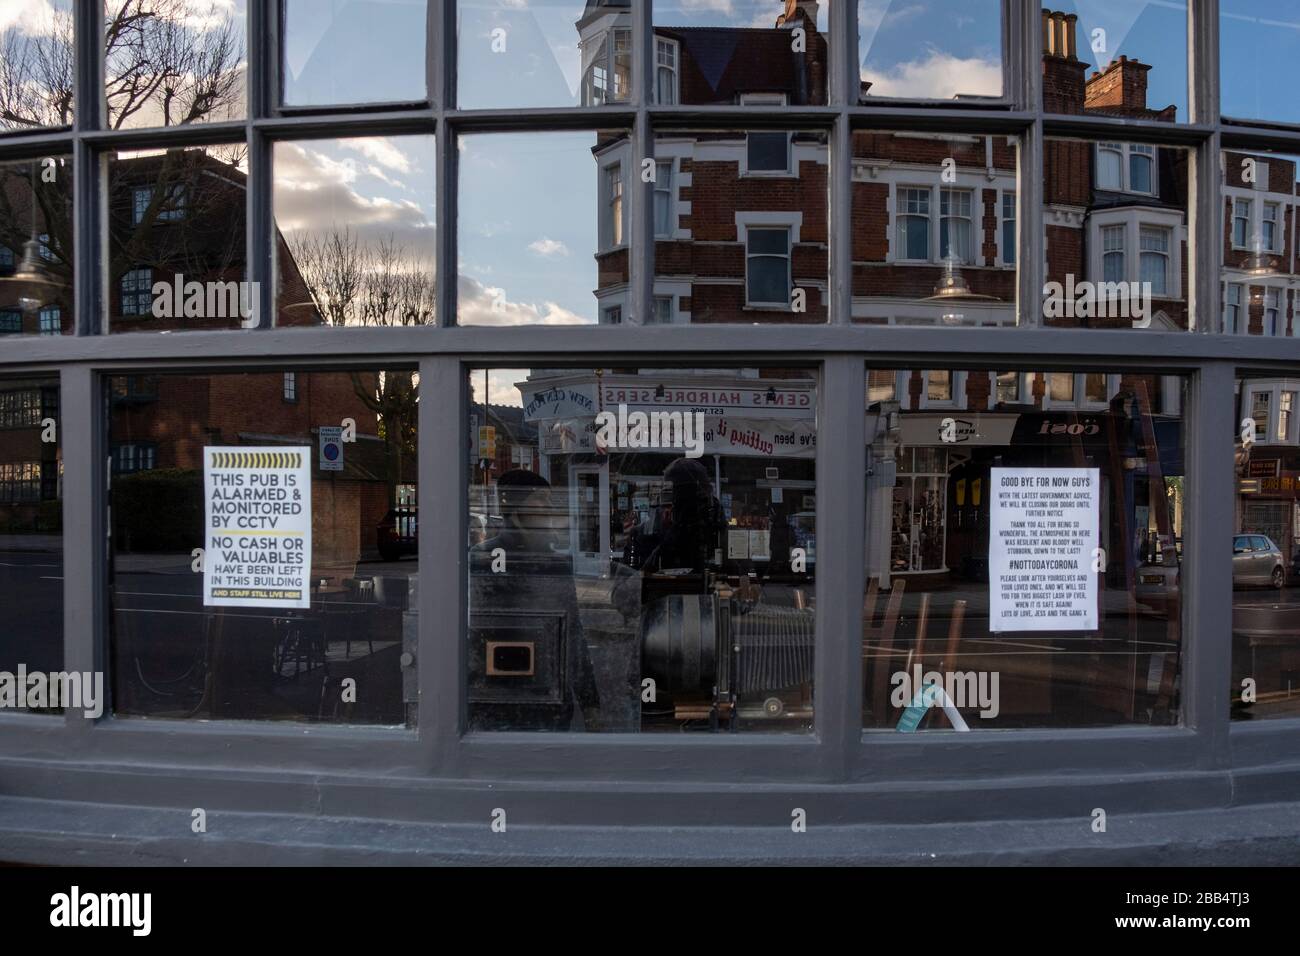 Coronavirus Covid-19 notice in the window of the Village Green pub, Muswell Hill London, 29th March 2020 Stock Photo